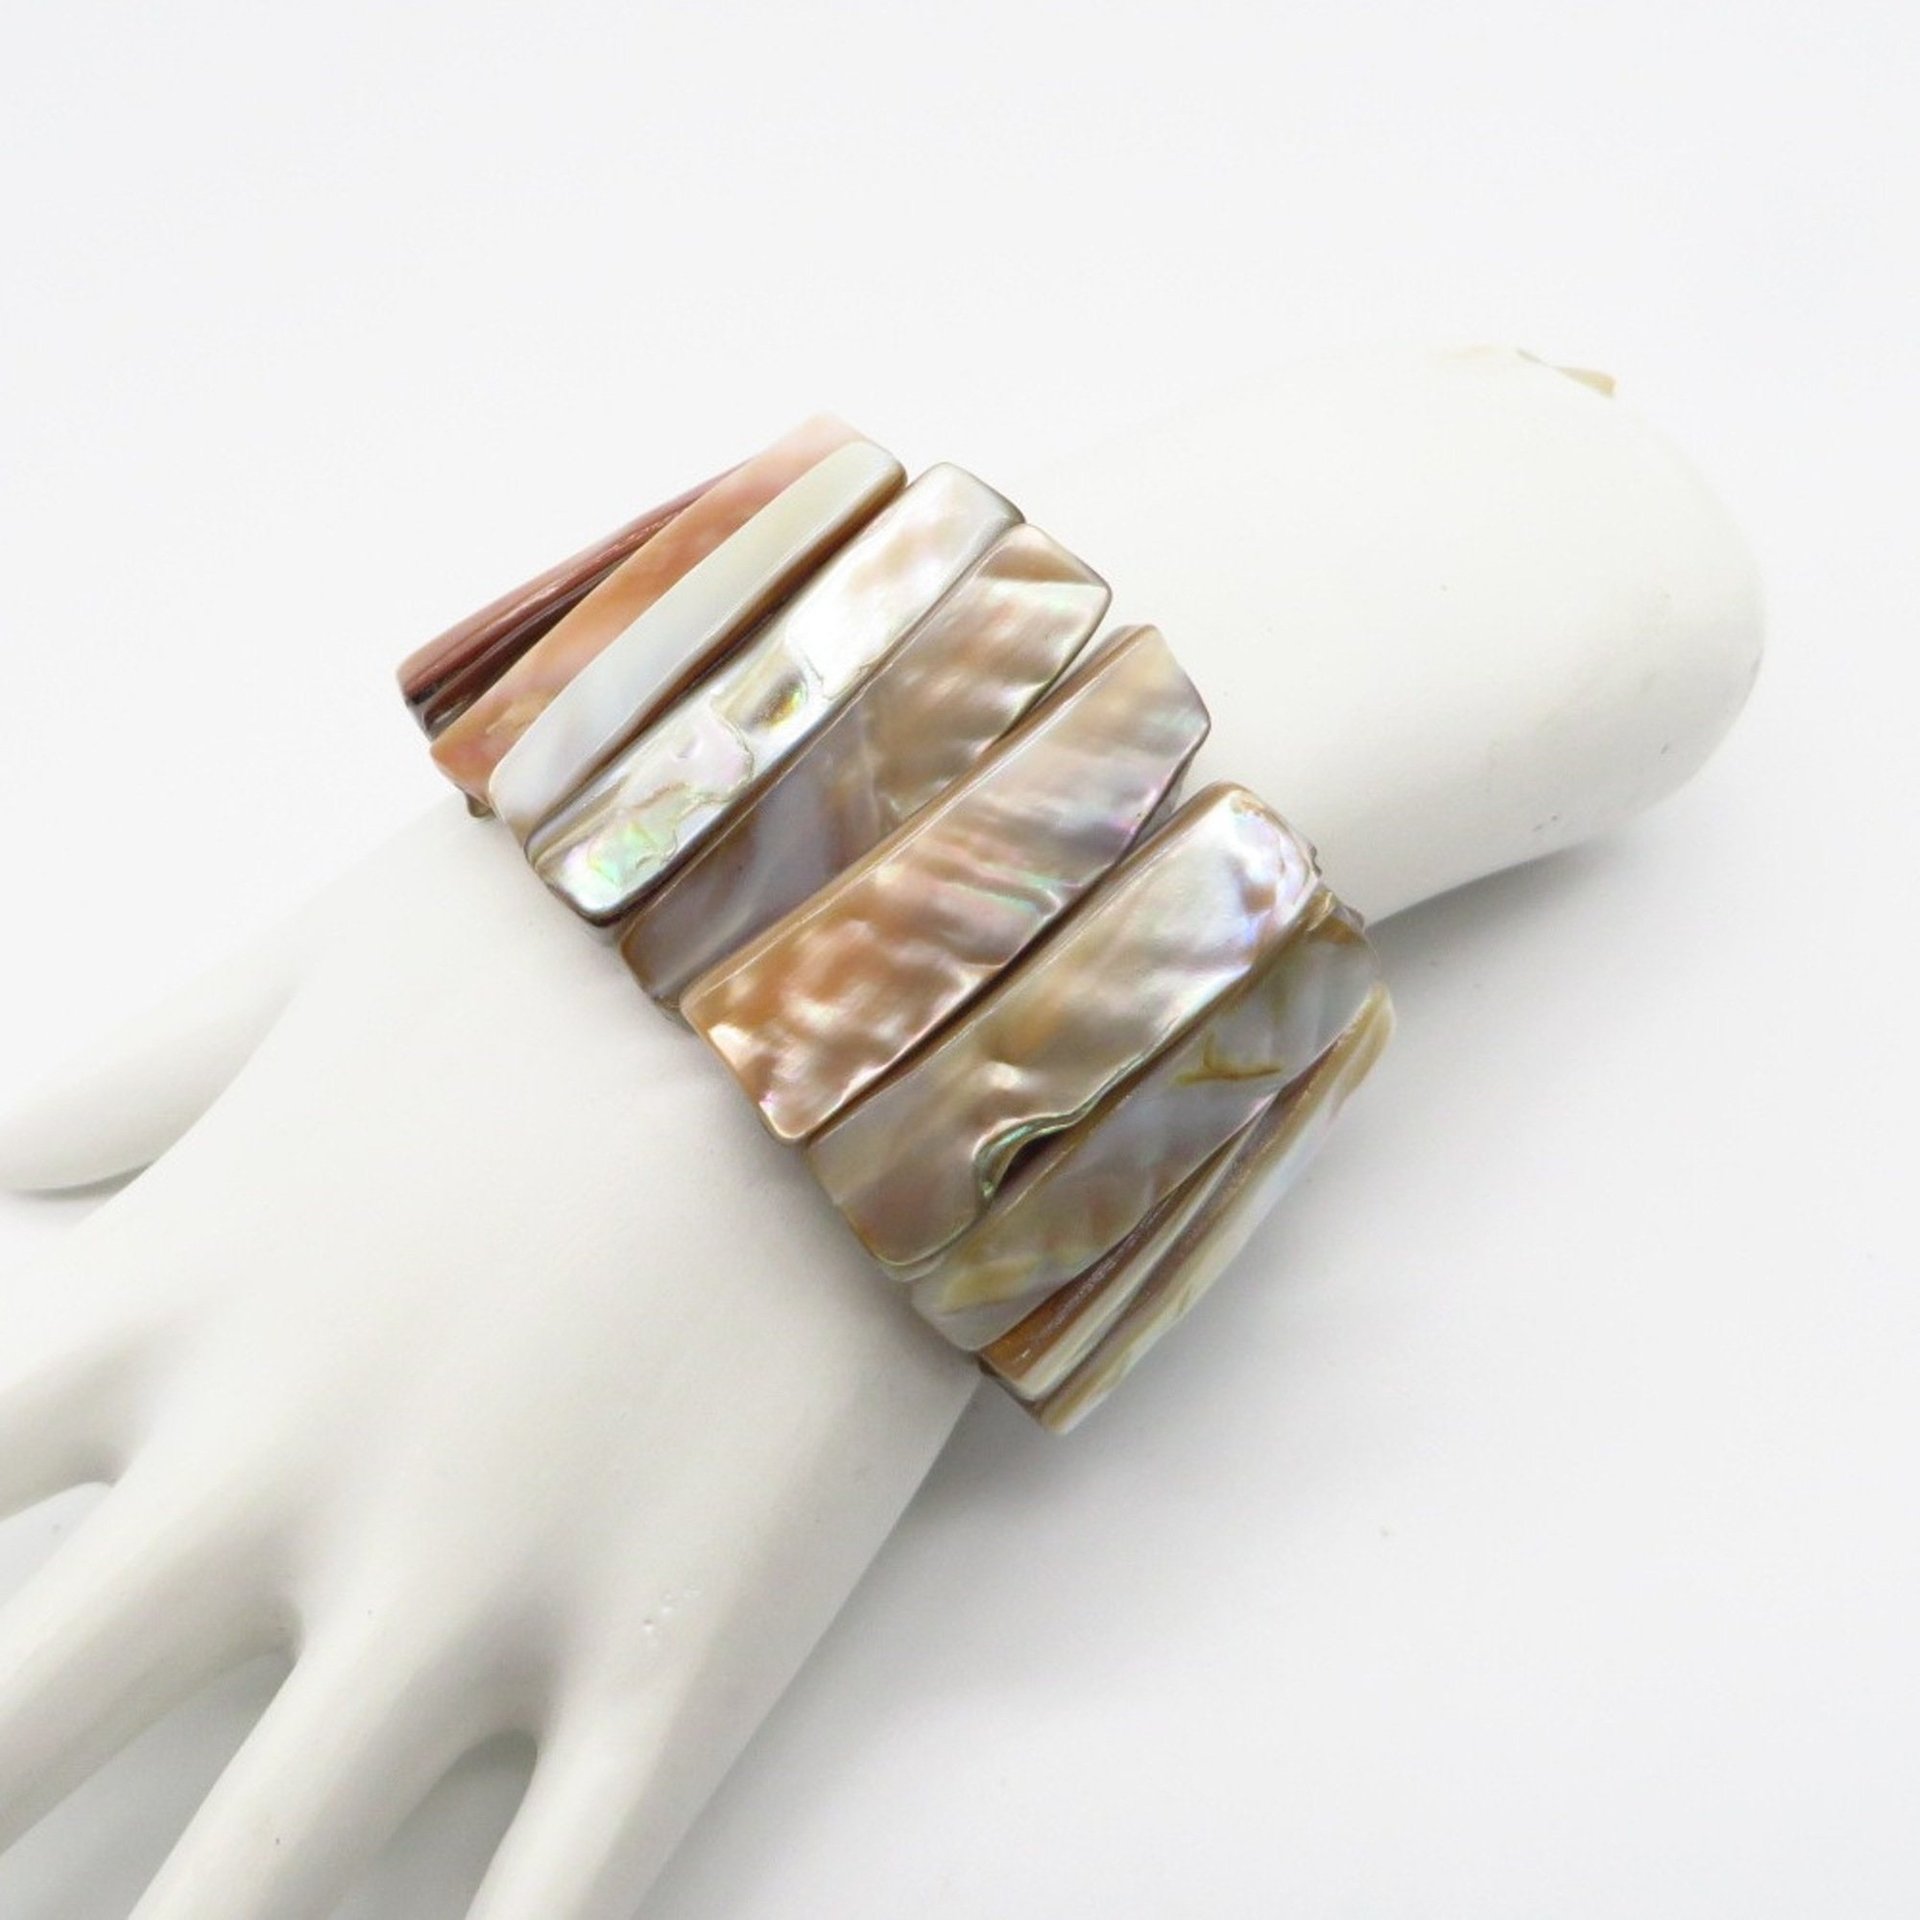 Dyed Shell Bracelet, Vintage Cocoa Brown and Cream Stretch Bracelet